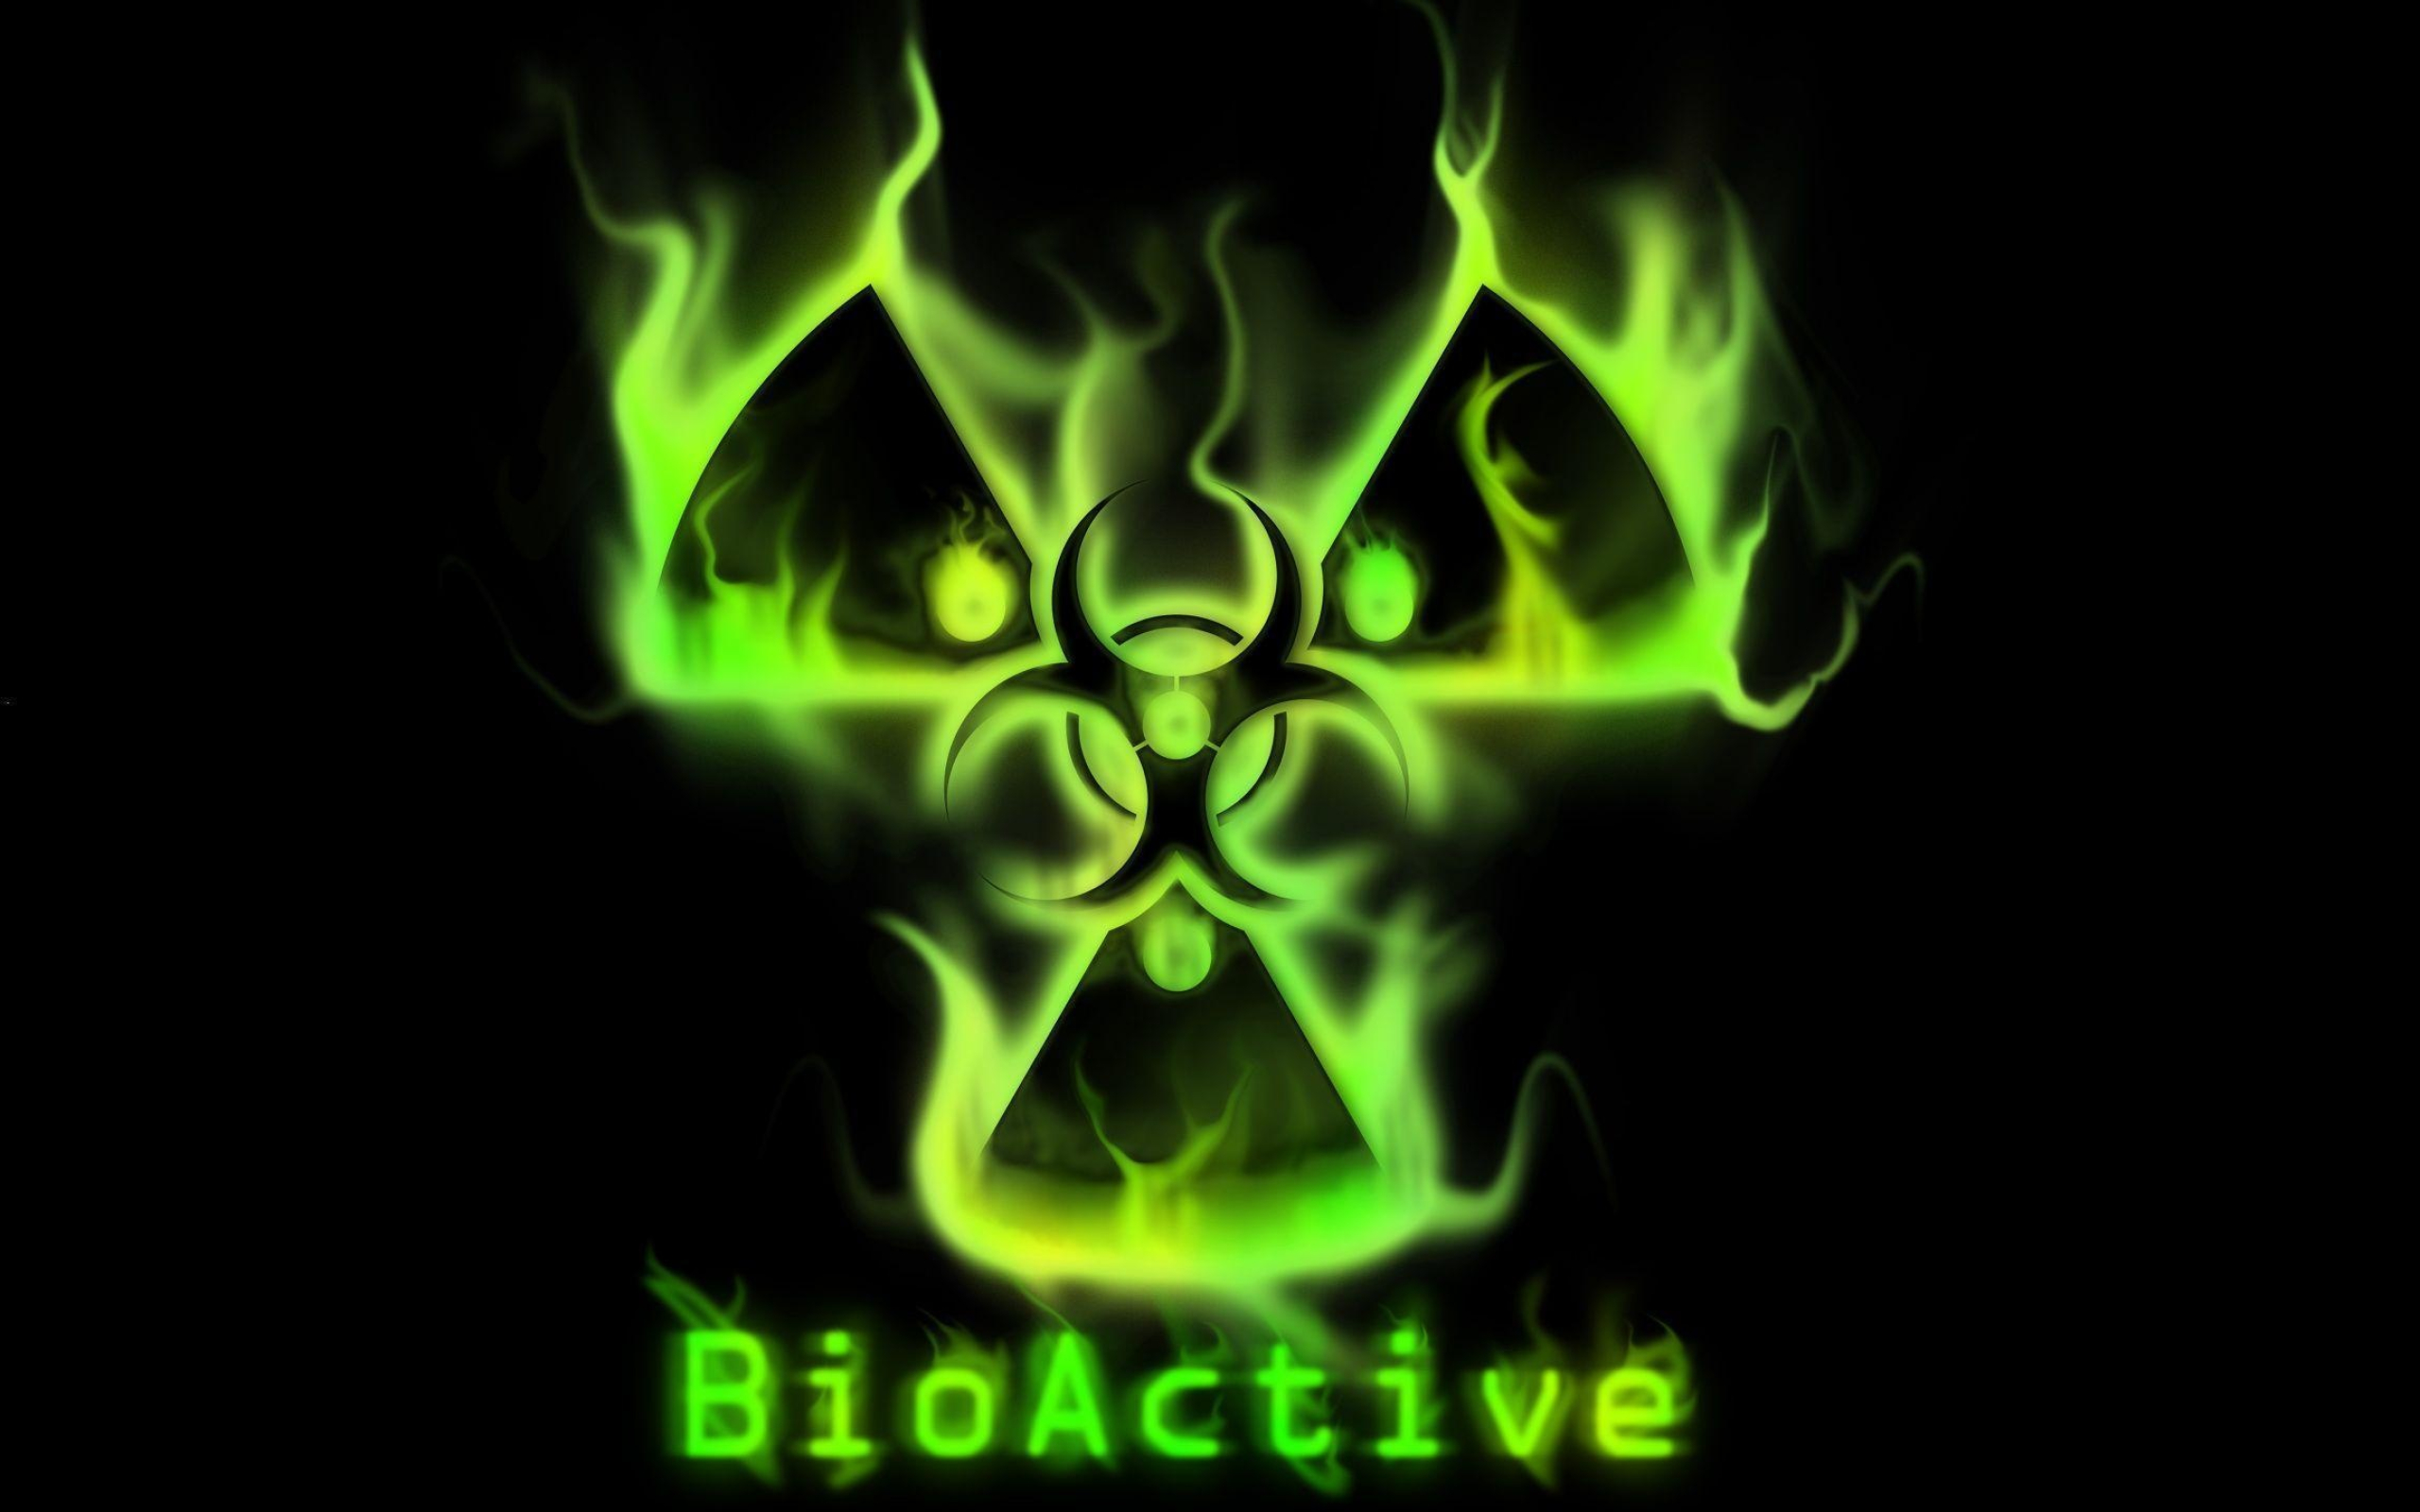 Green Biohazard: BioActive, The labeling of biological materials that carry a significant health risk, including viral samples. 2560x1600 HD Background.